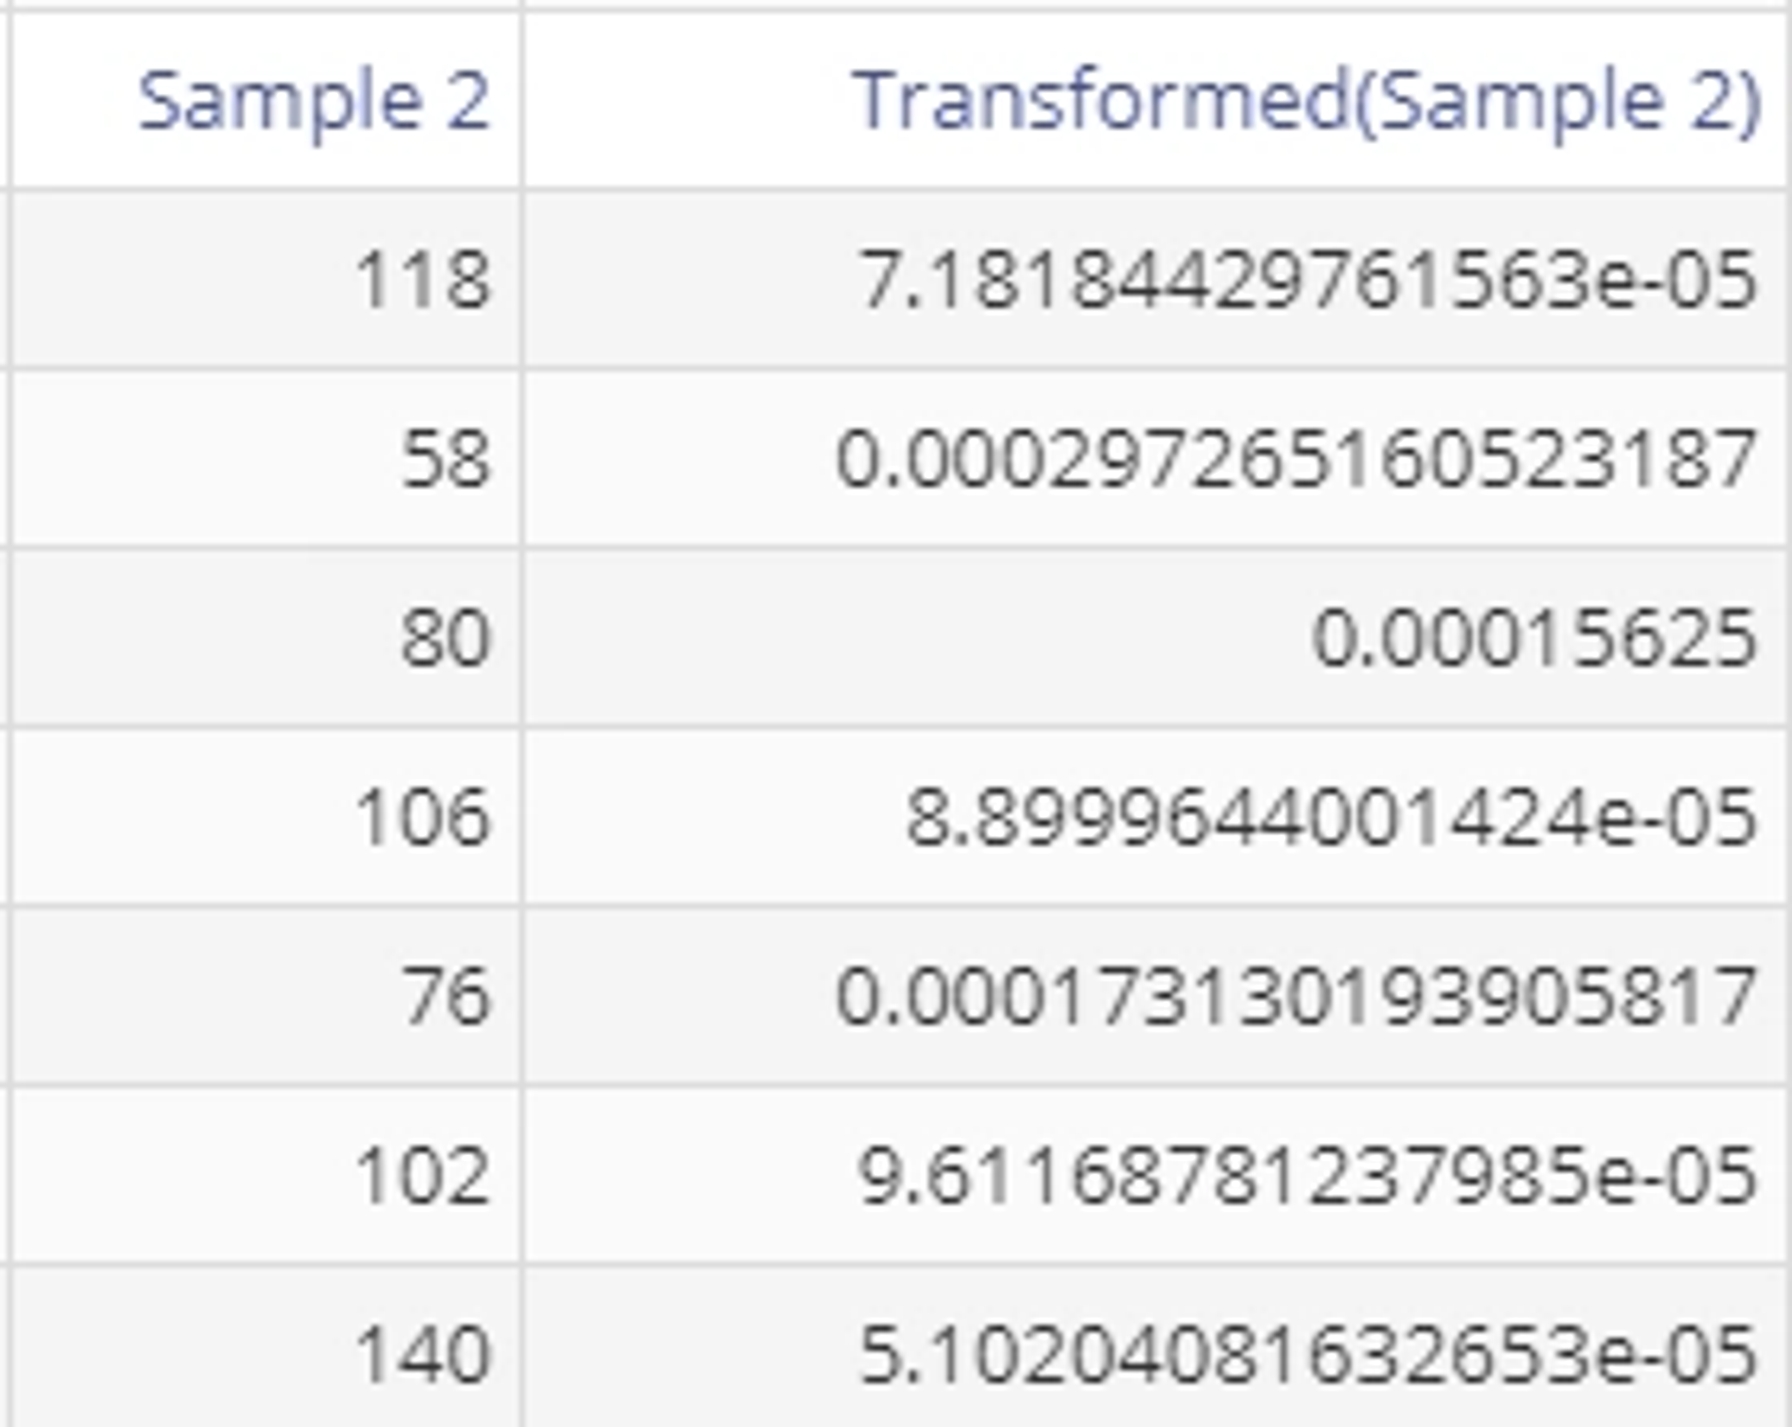 Sample transformations output data.